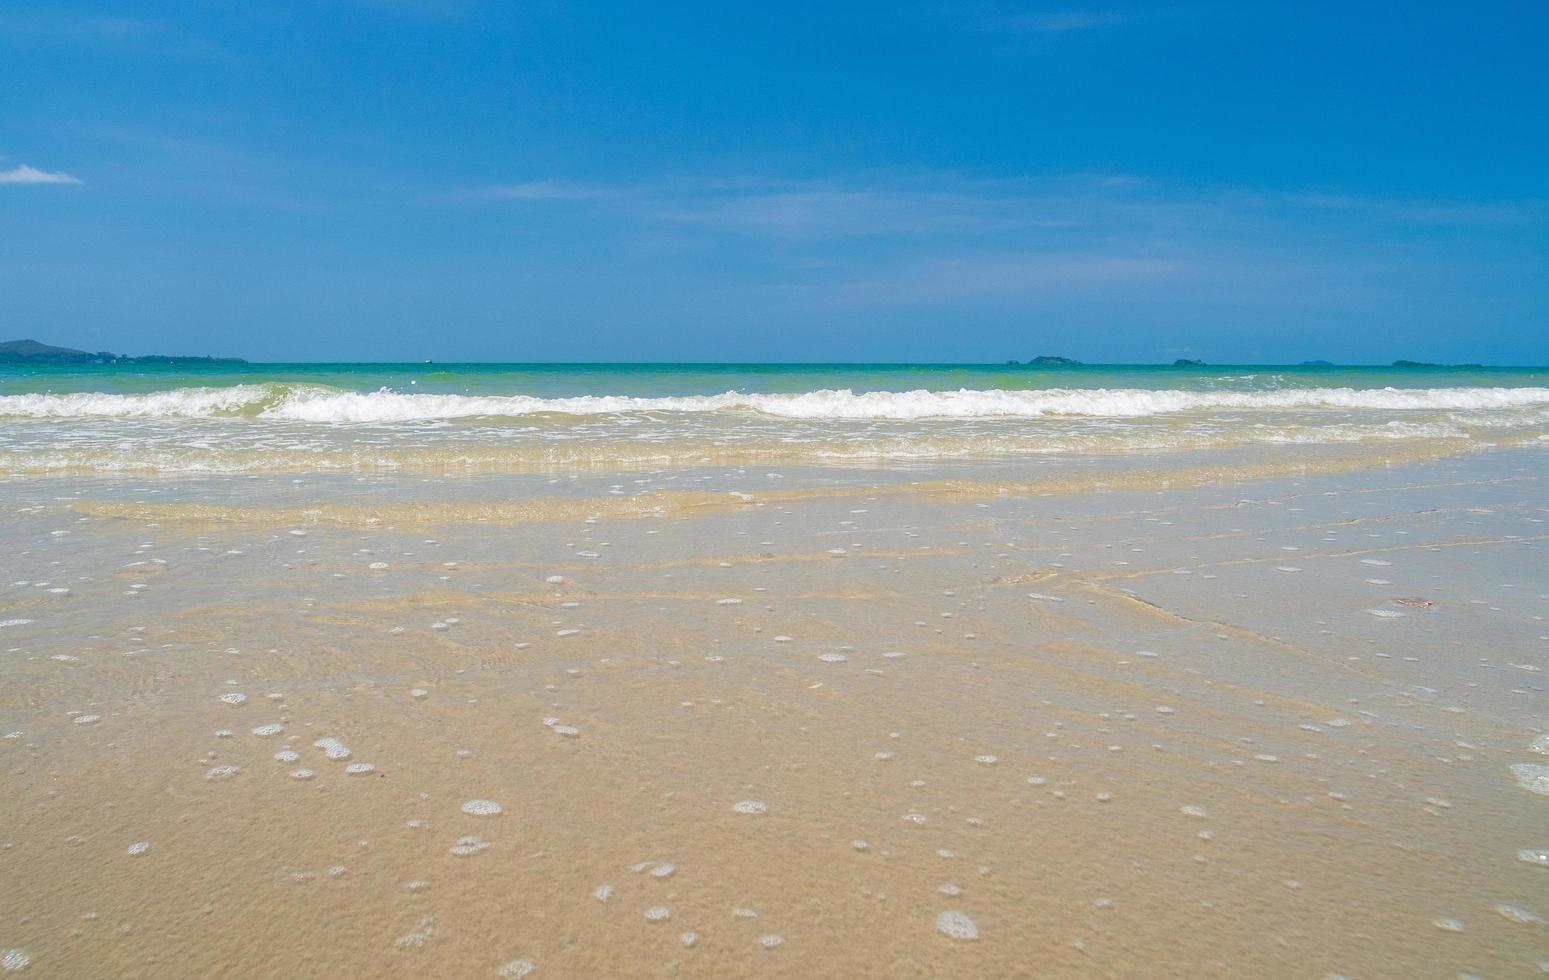 view summer landscape Suan Son Beach has Clean white sand beach Stretching along coast Gulf Thailand East country And  clear skies, suitable for relaxation, vacation in Thailand Rayong photo